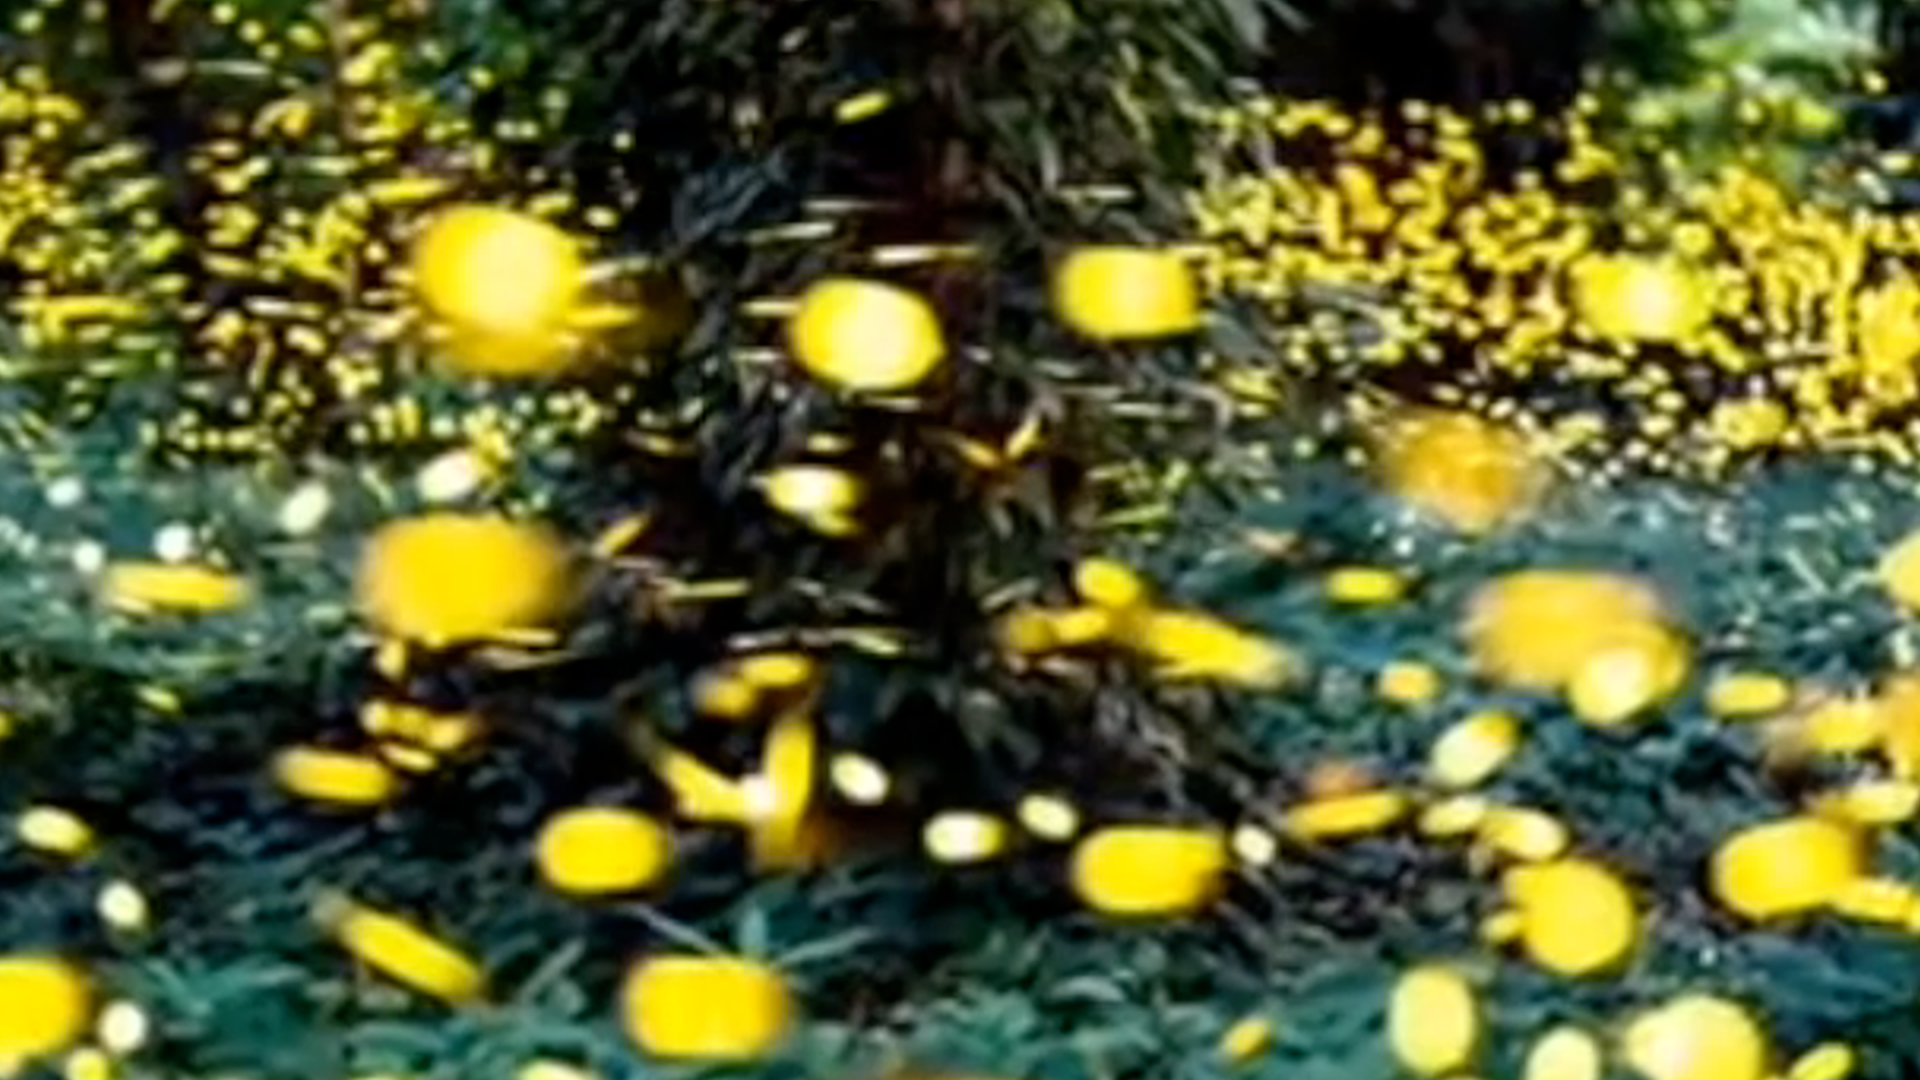 A night visit to the firefly forest in Guangzhou